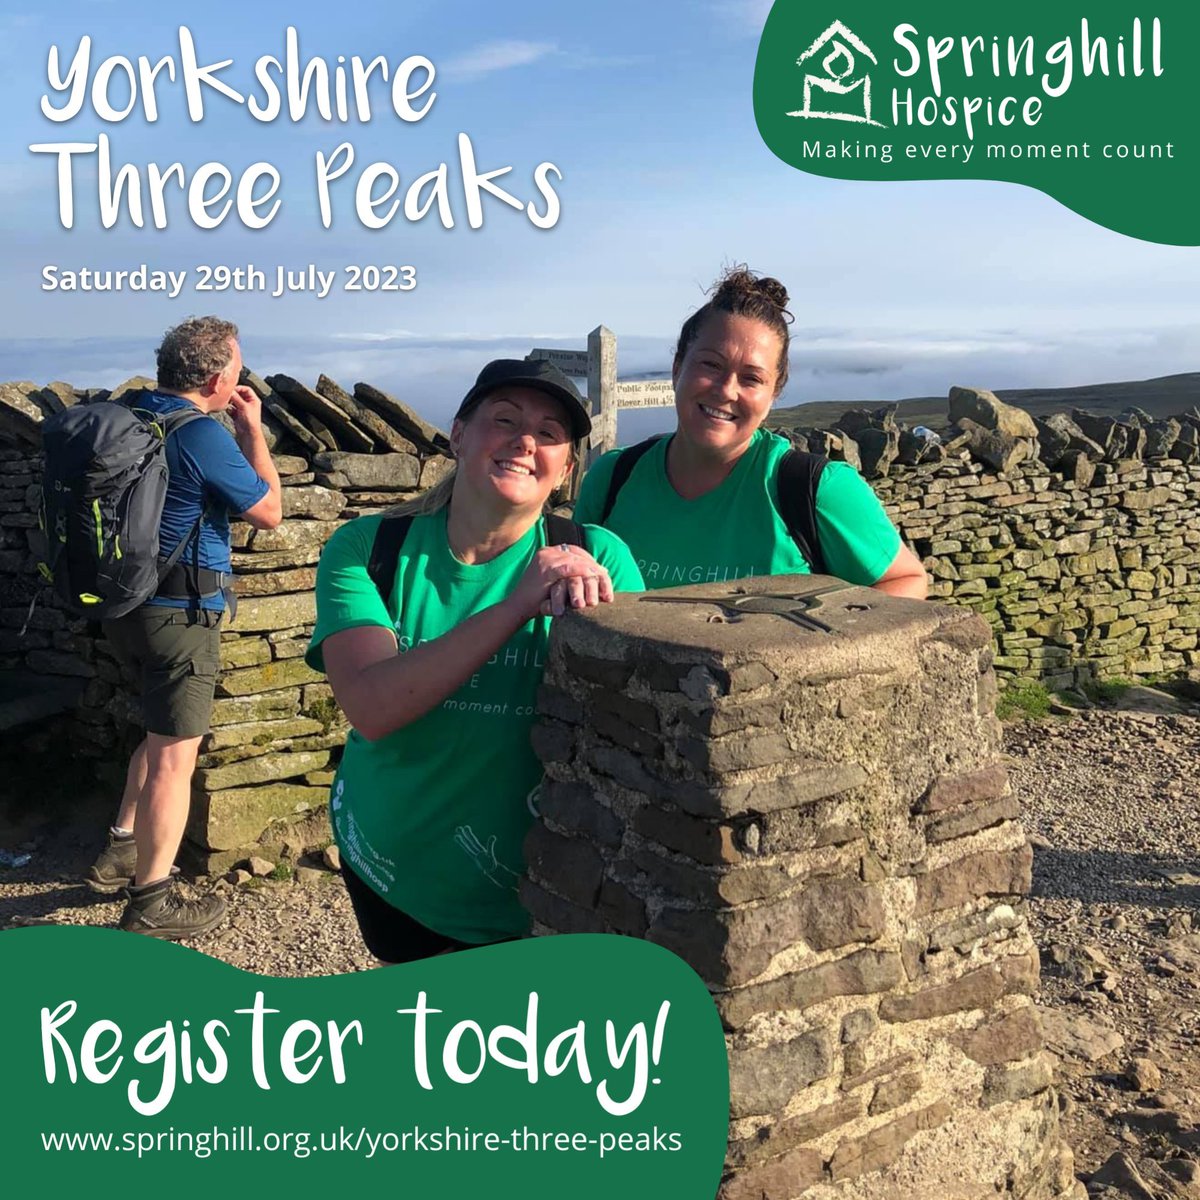 Take on a challenge in 2023 and get that feeling of accomplishment from doing something amazing, all while raising money for Springhill Hospice with our Yorkshire Three Peaks! ⛰️💚 Register today at bit.ly/3GDzaJi